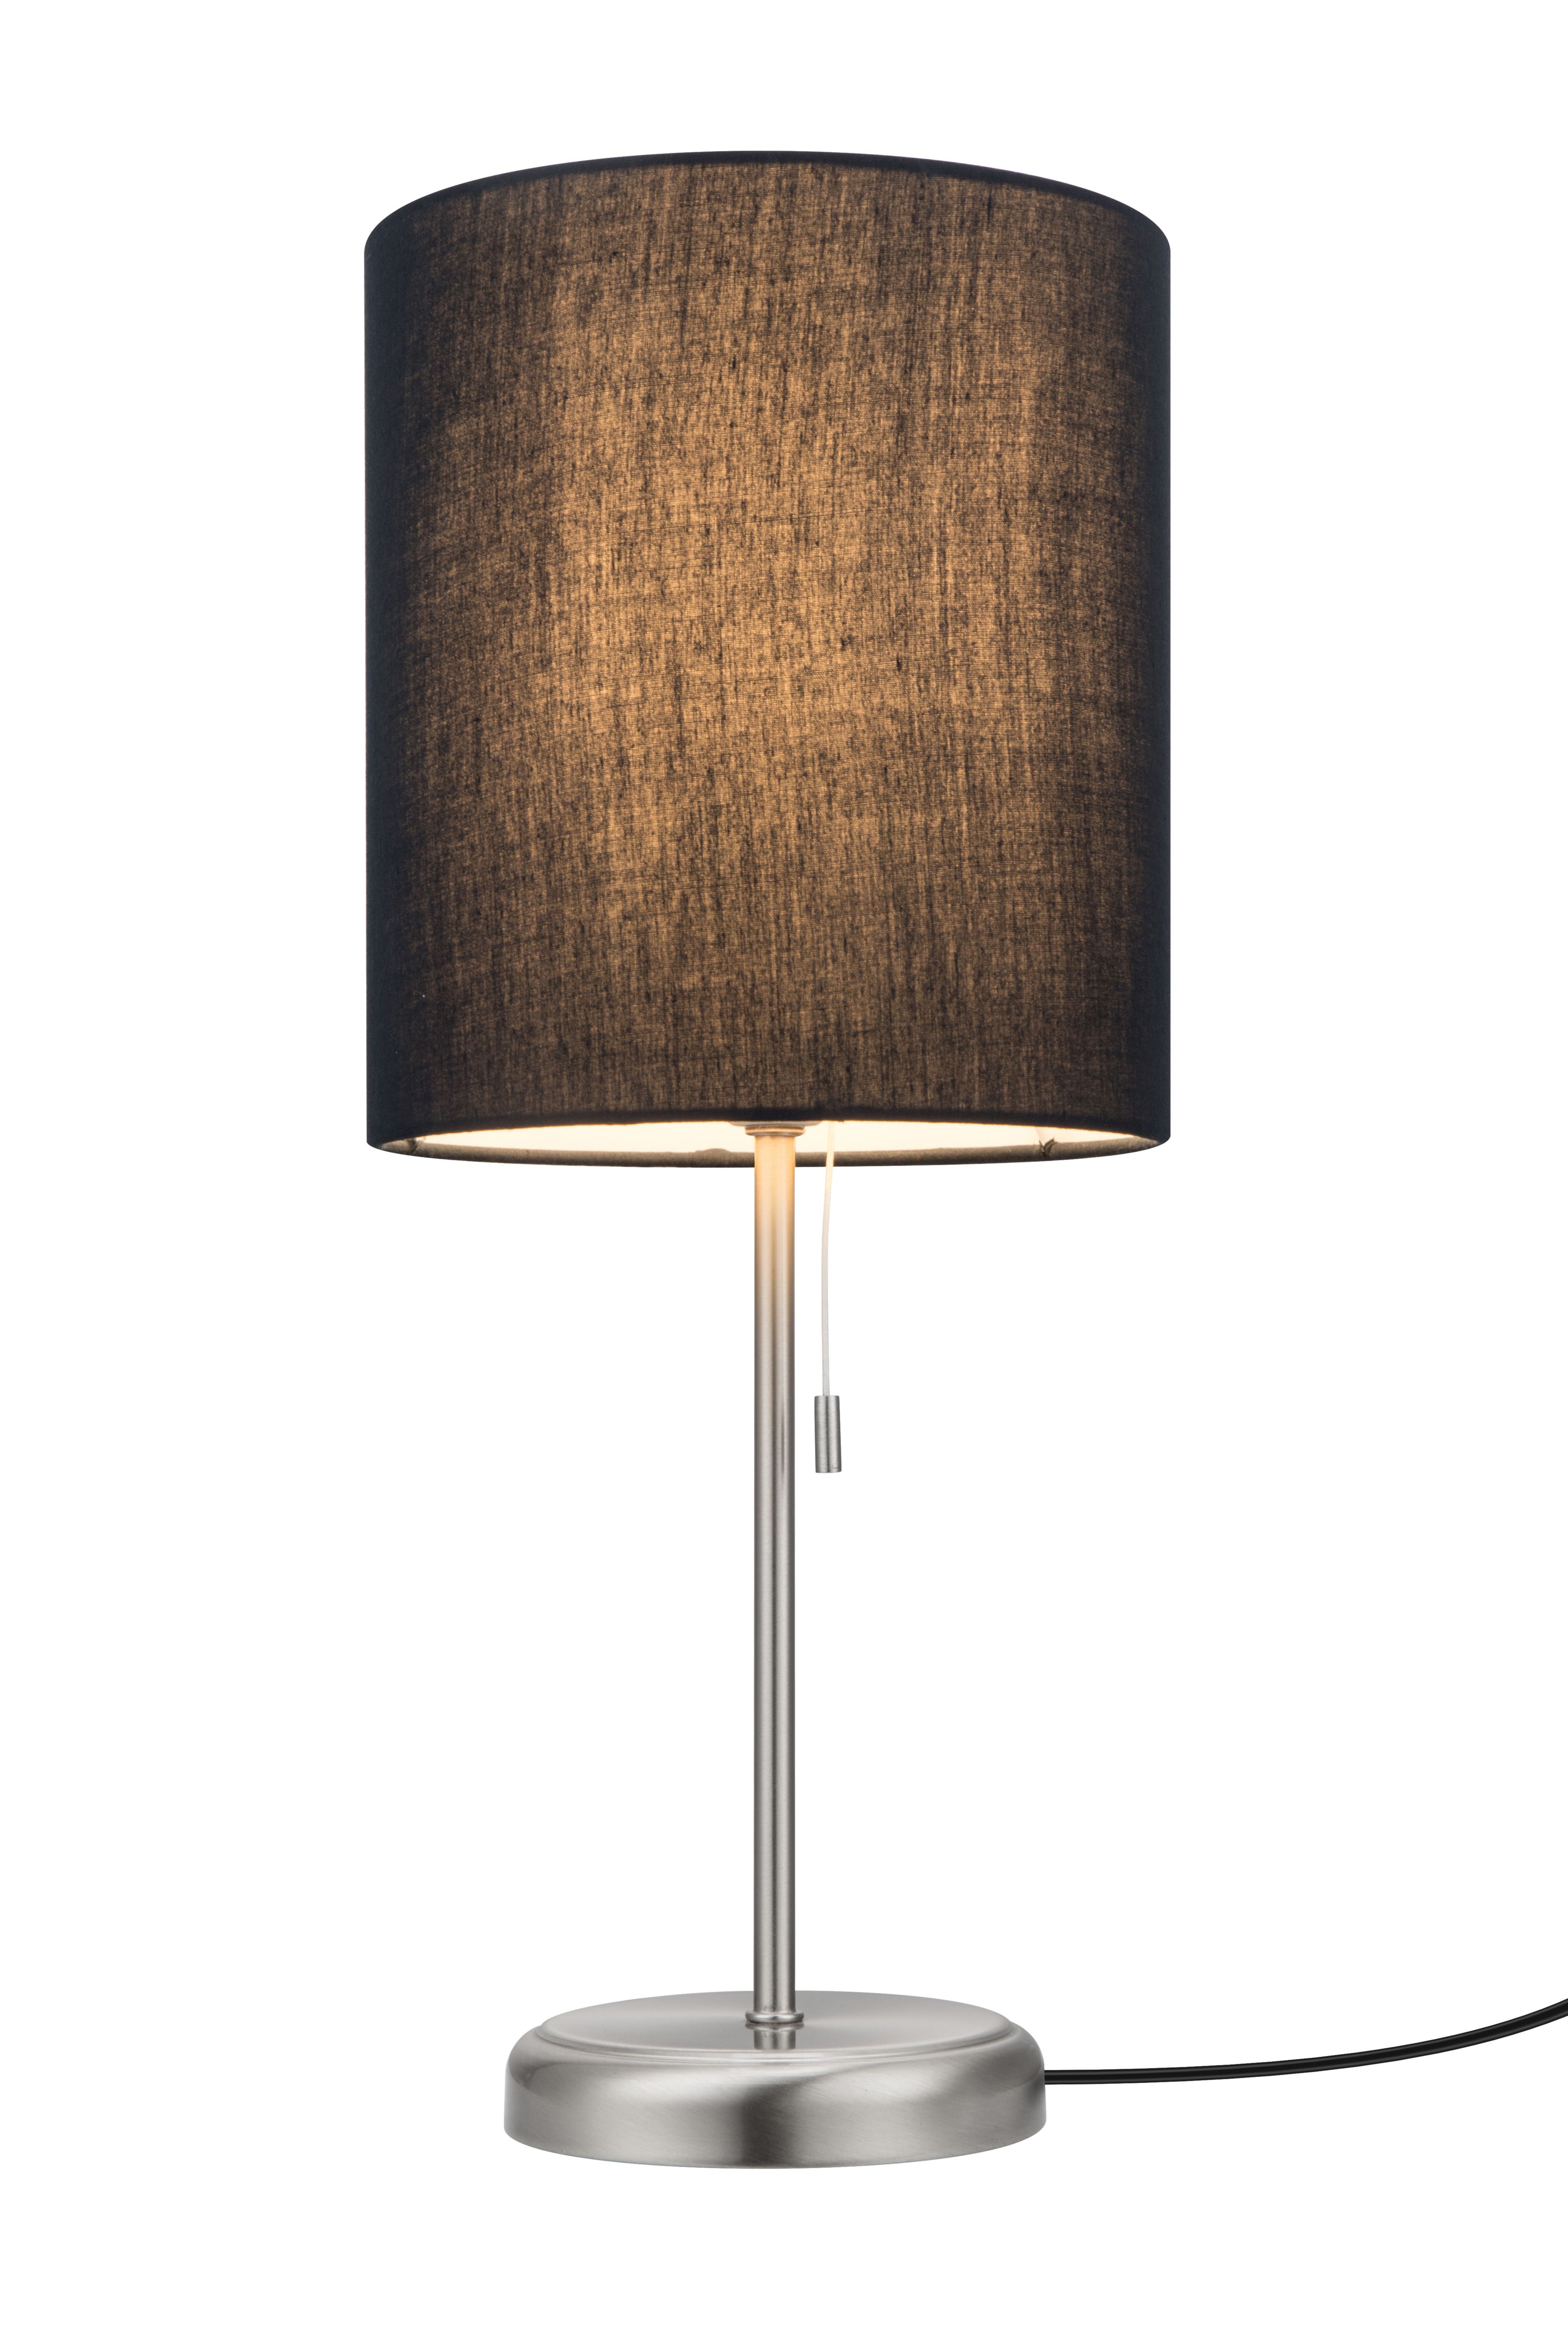 GoodHome Penistone Brushed Navy Chrome effect Straight Table lamp